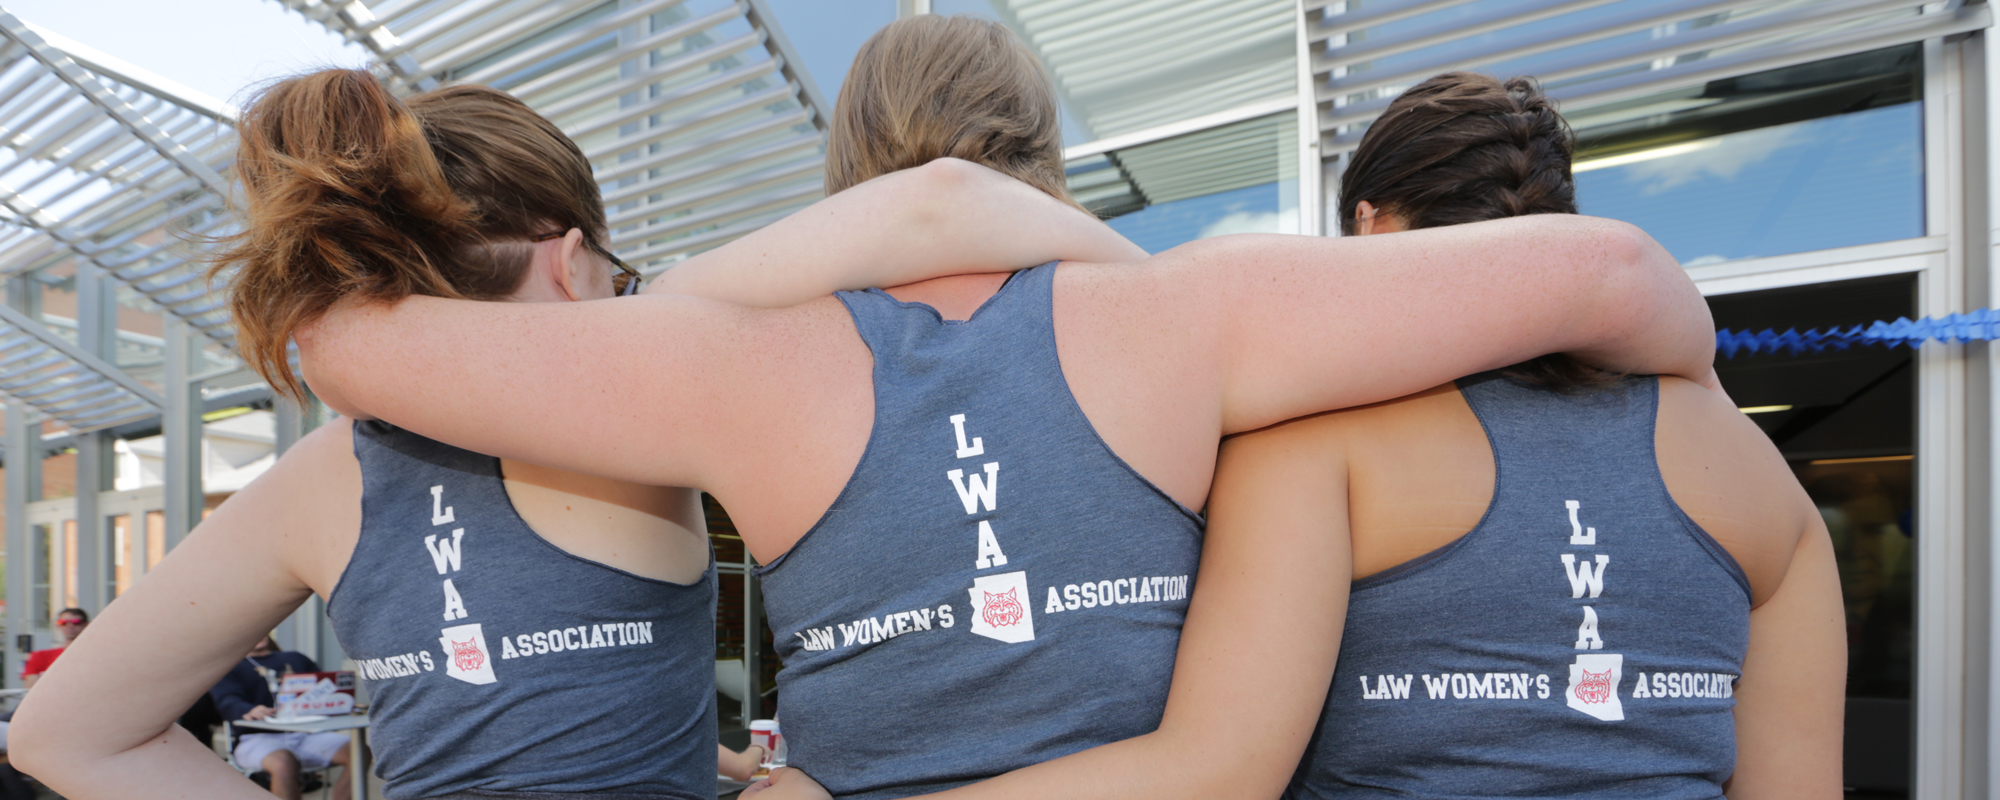 Three women link arms and display the backs of their shirts, promoting the Law Womens Association